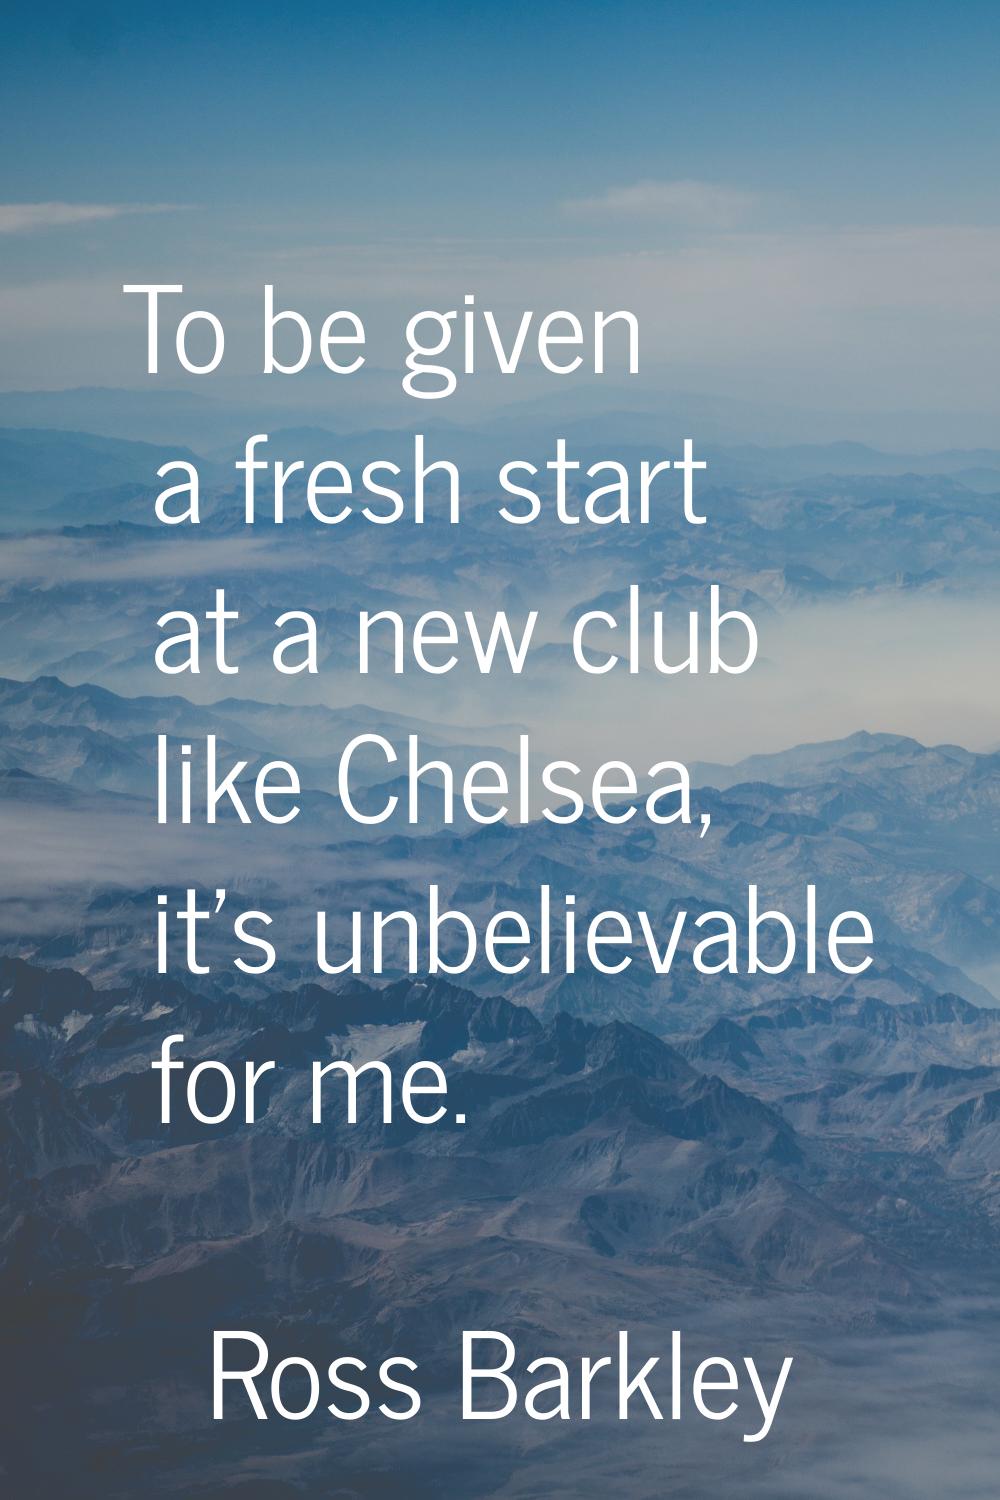 To be given a fresh start at a new club like Chelsea, it's unbelievable for me.